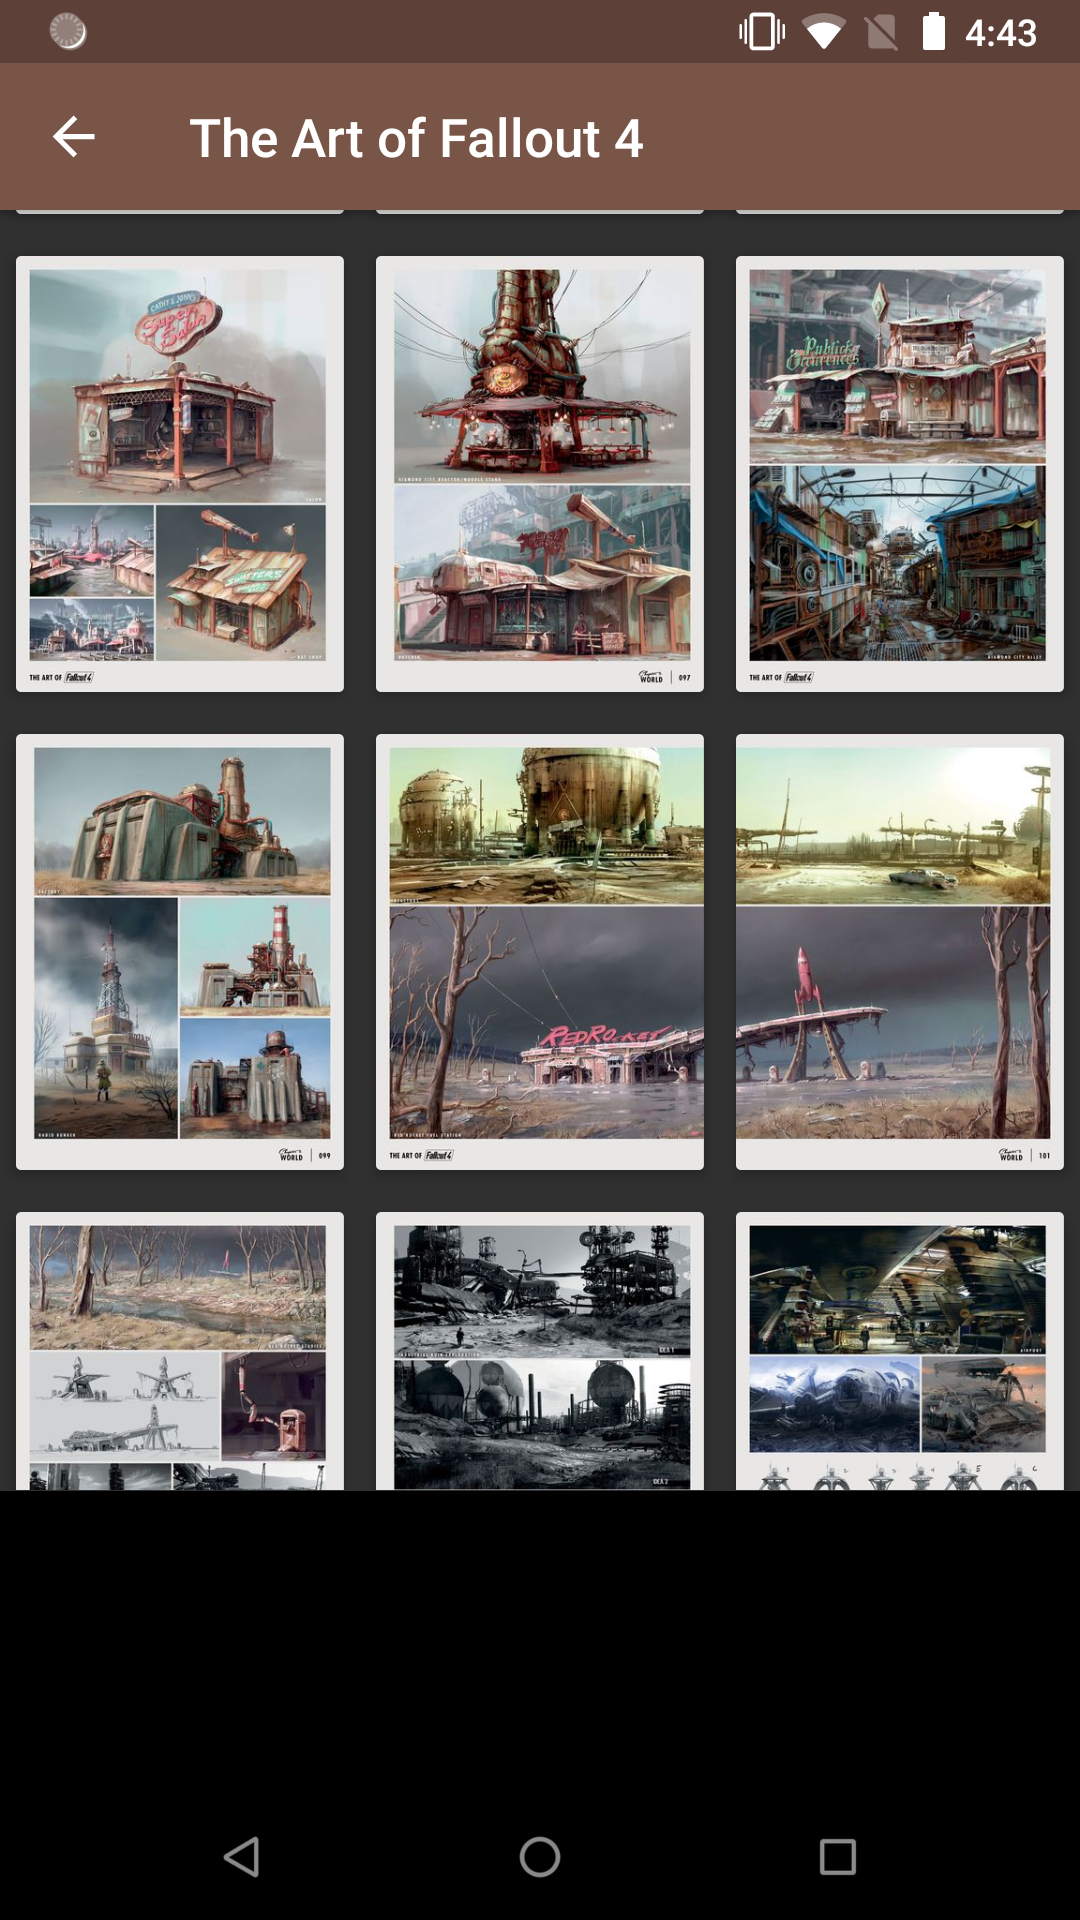 Fallout Artbook strapon,game,feast,gallery,for,android,screensaver,femdom,stockings,demonic,porn,apps,mythras,hentai,yuri,comics,anal,fuck,latex,pron,hantai,lair,apk,adultwallpapers,anime,sexy,kristinf,erotic